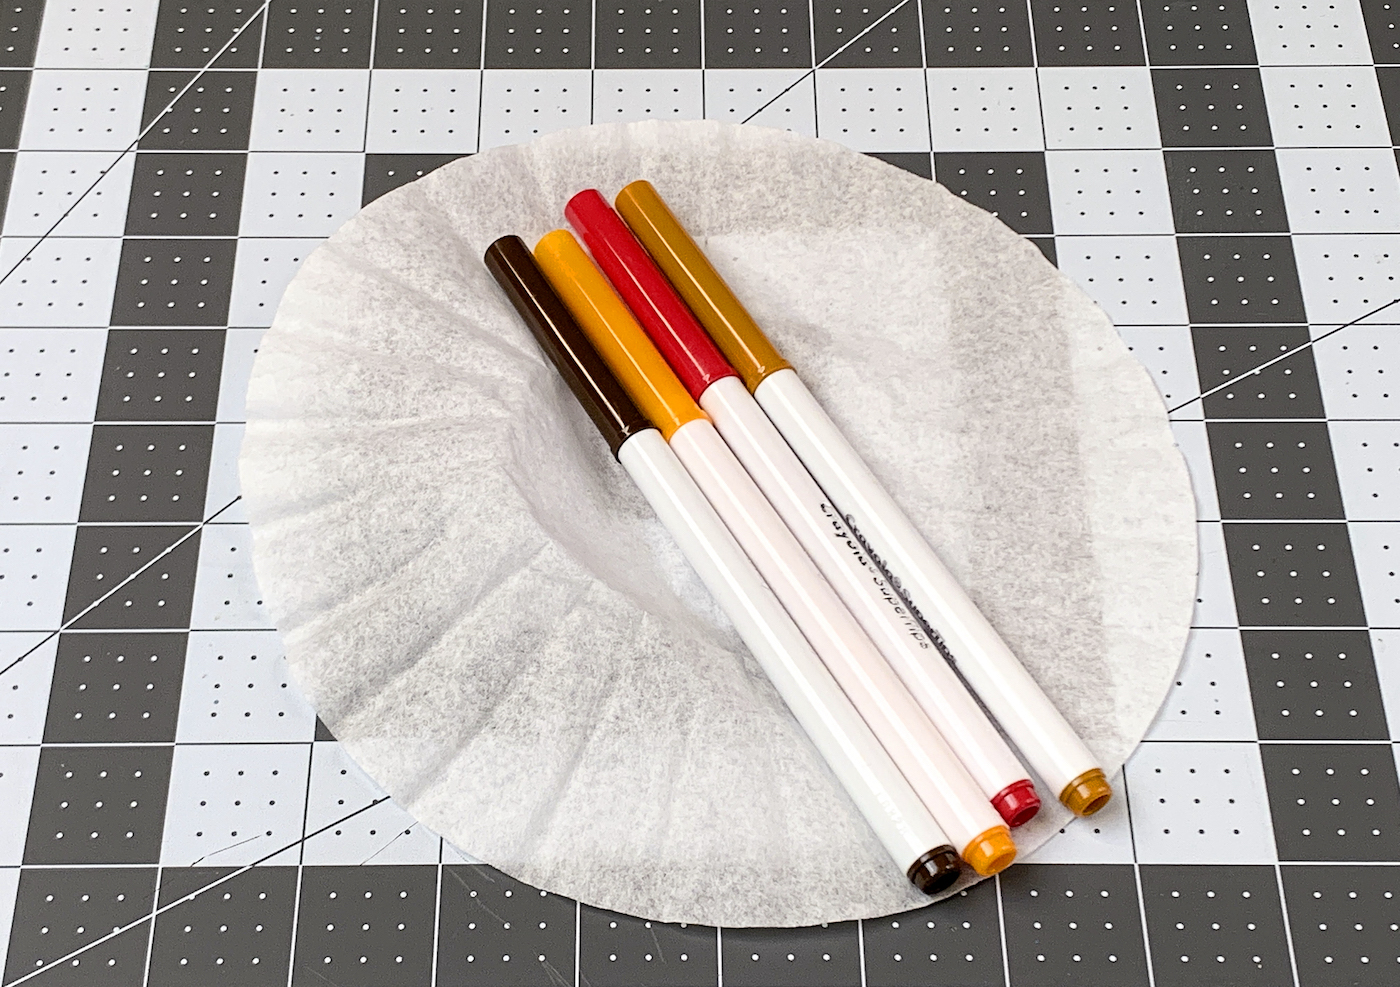 Four washable markers on top of a coffee filter